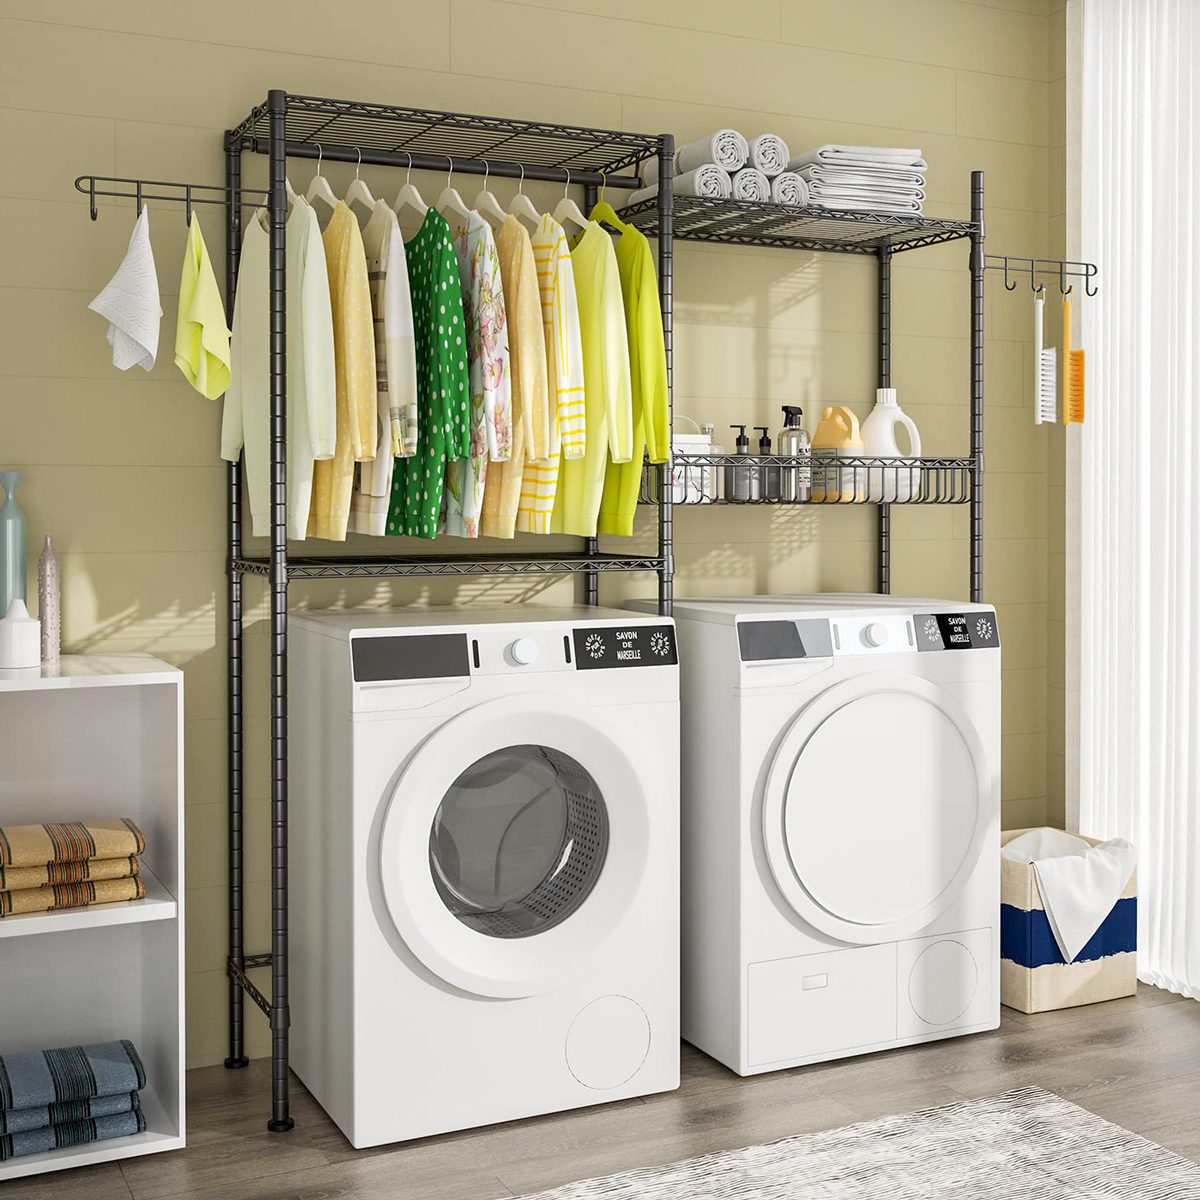 Laundry Room Shelves with Multi Colored Storage Baskets